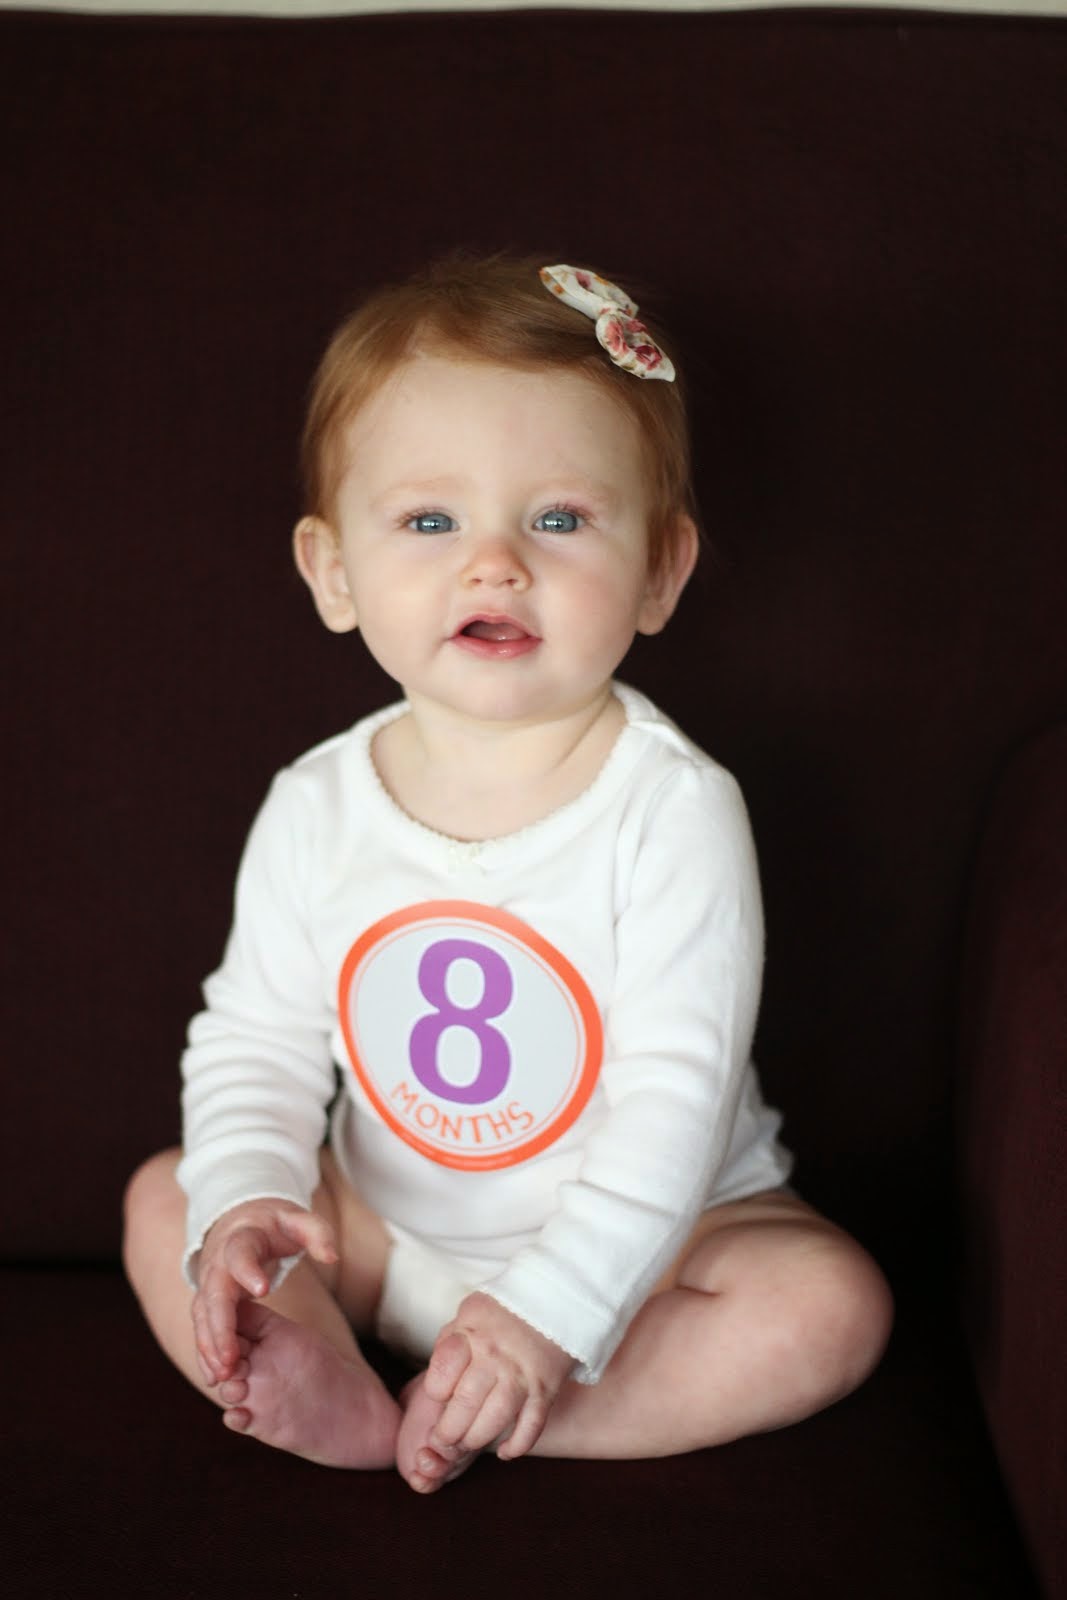 Nora at 8 Months